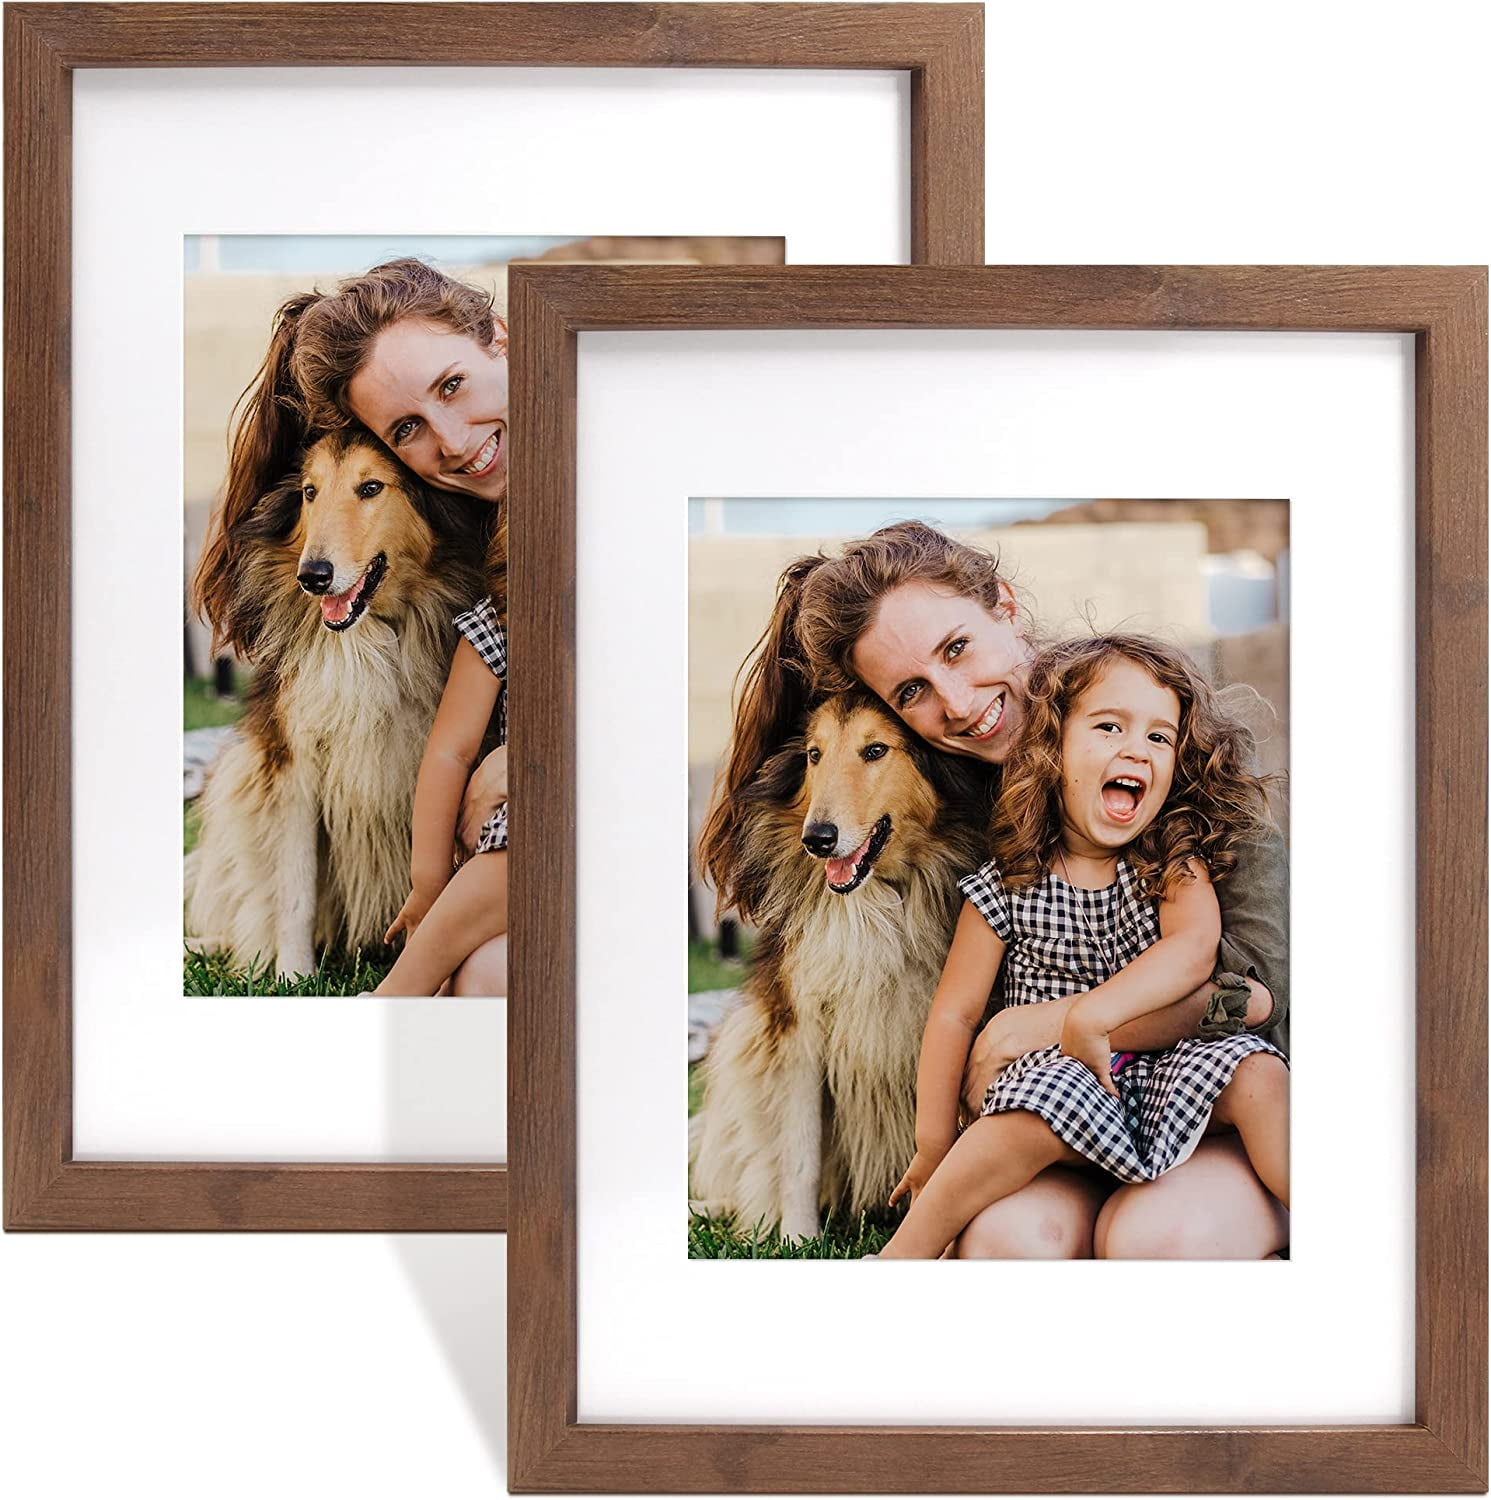 HAUS AND HUES Solid Oak 4x6 Picture Frame for Wall or Tabletop Set of 6 -  Beige Gallery Wall Frames, 4x6 Frames for Pictures, 4x6 Picture Frame Bulk